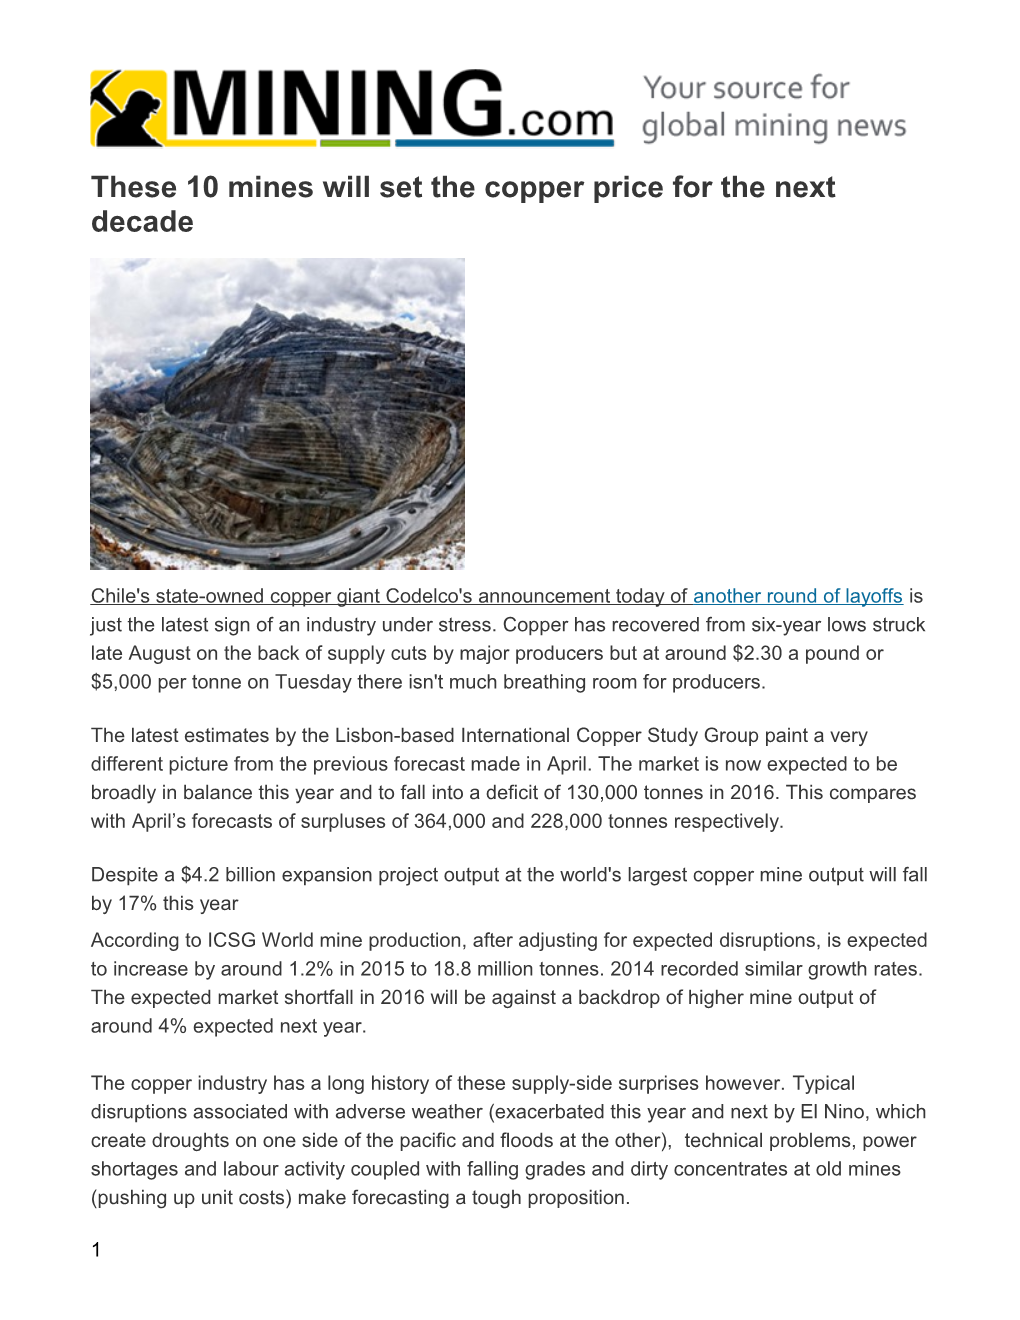 These 10 Mines Will Set the Copper Price for the Next Decade